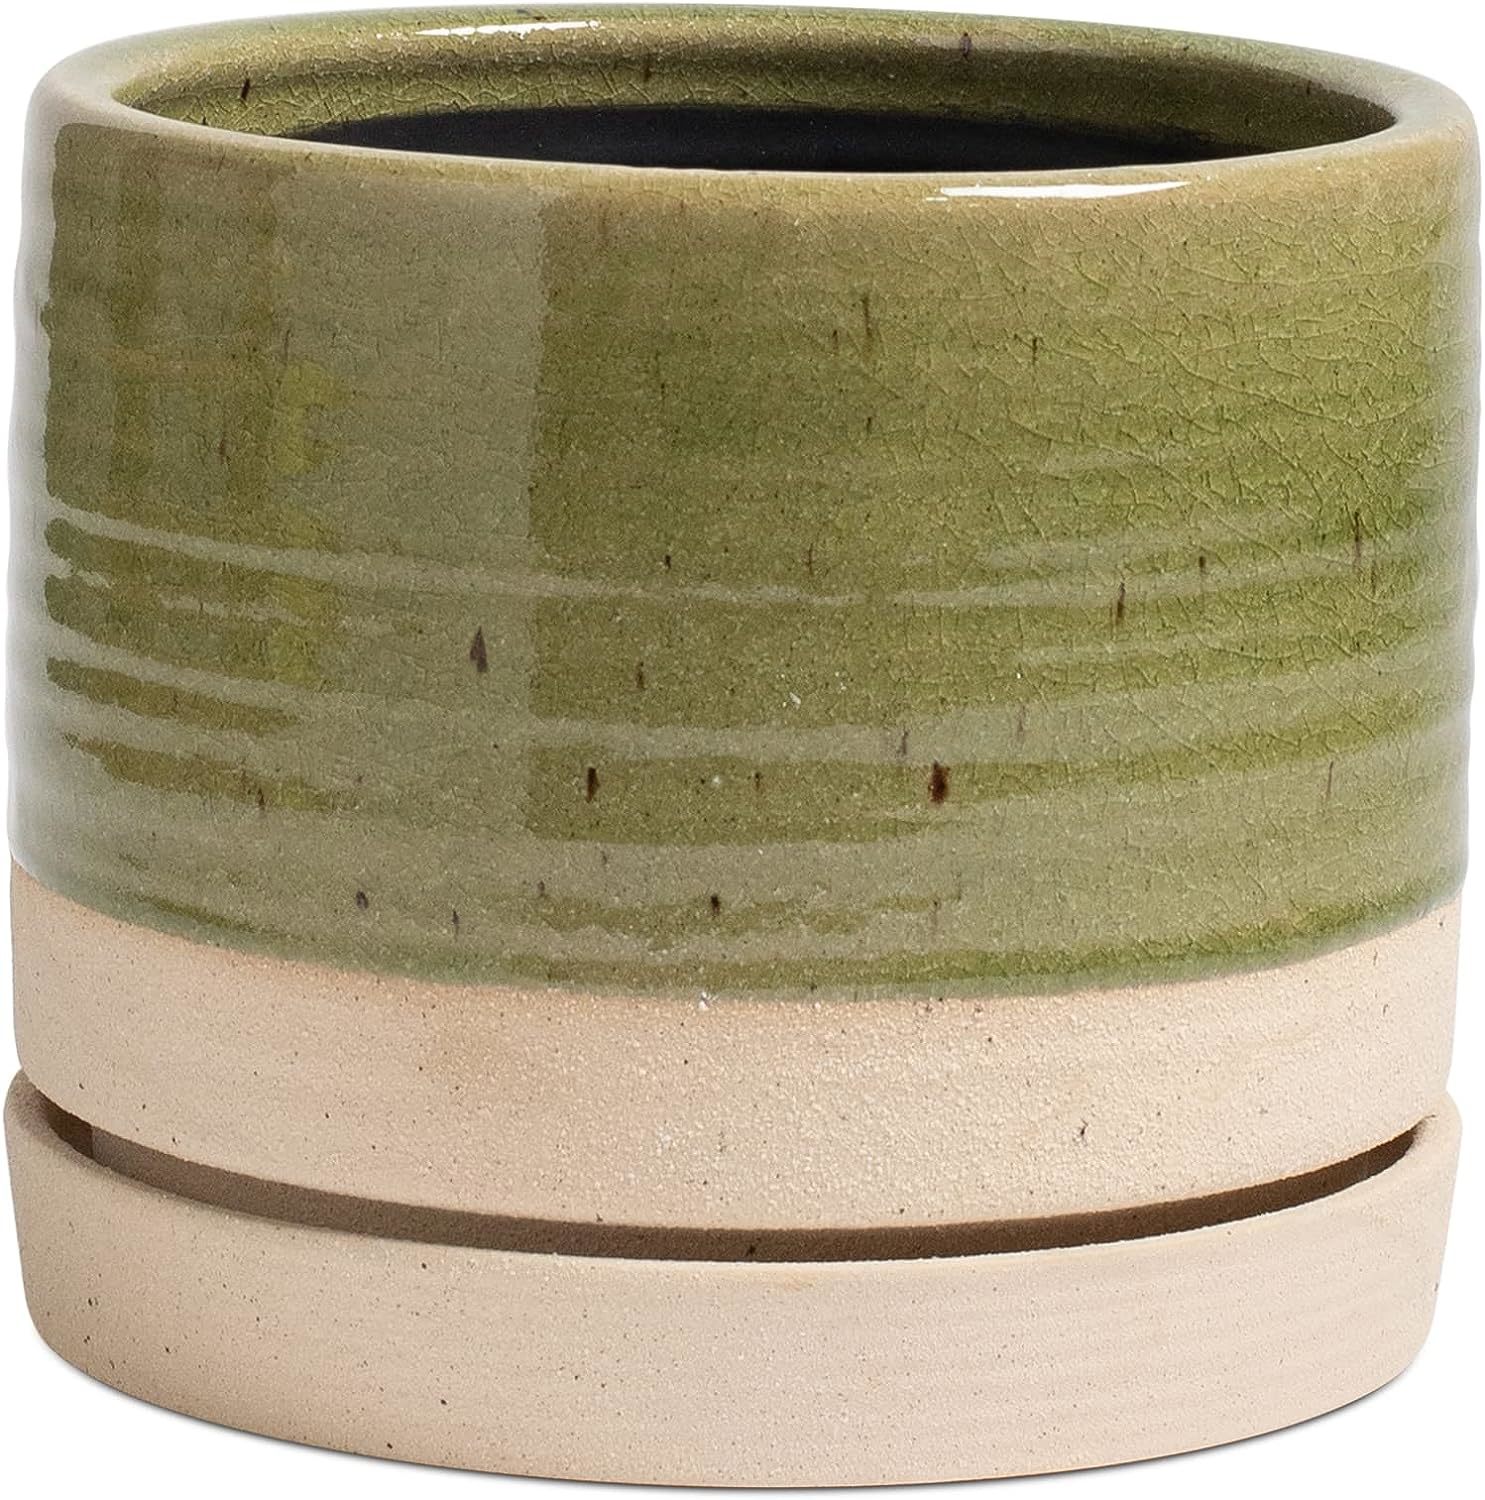 Herduk 8 Inch Plant Pots, Green Cylinder Round Planter Pot,, With Drainage Hole - $56.96